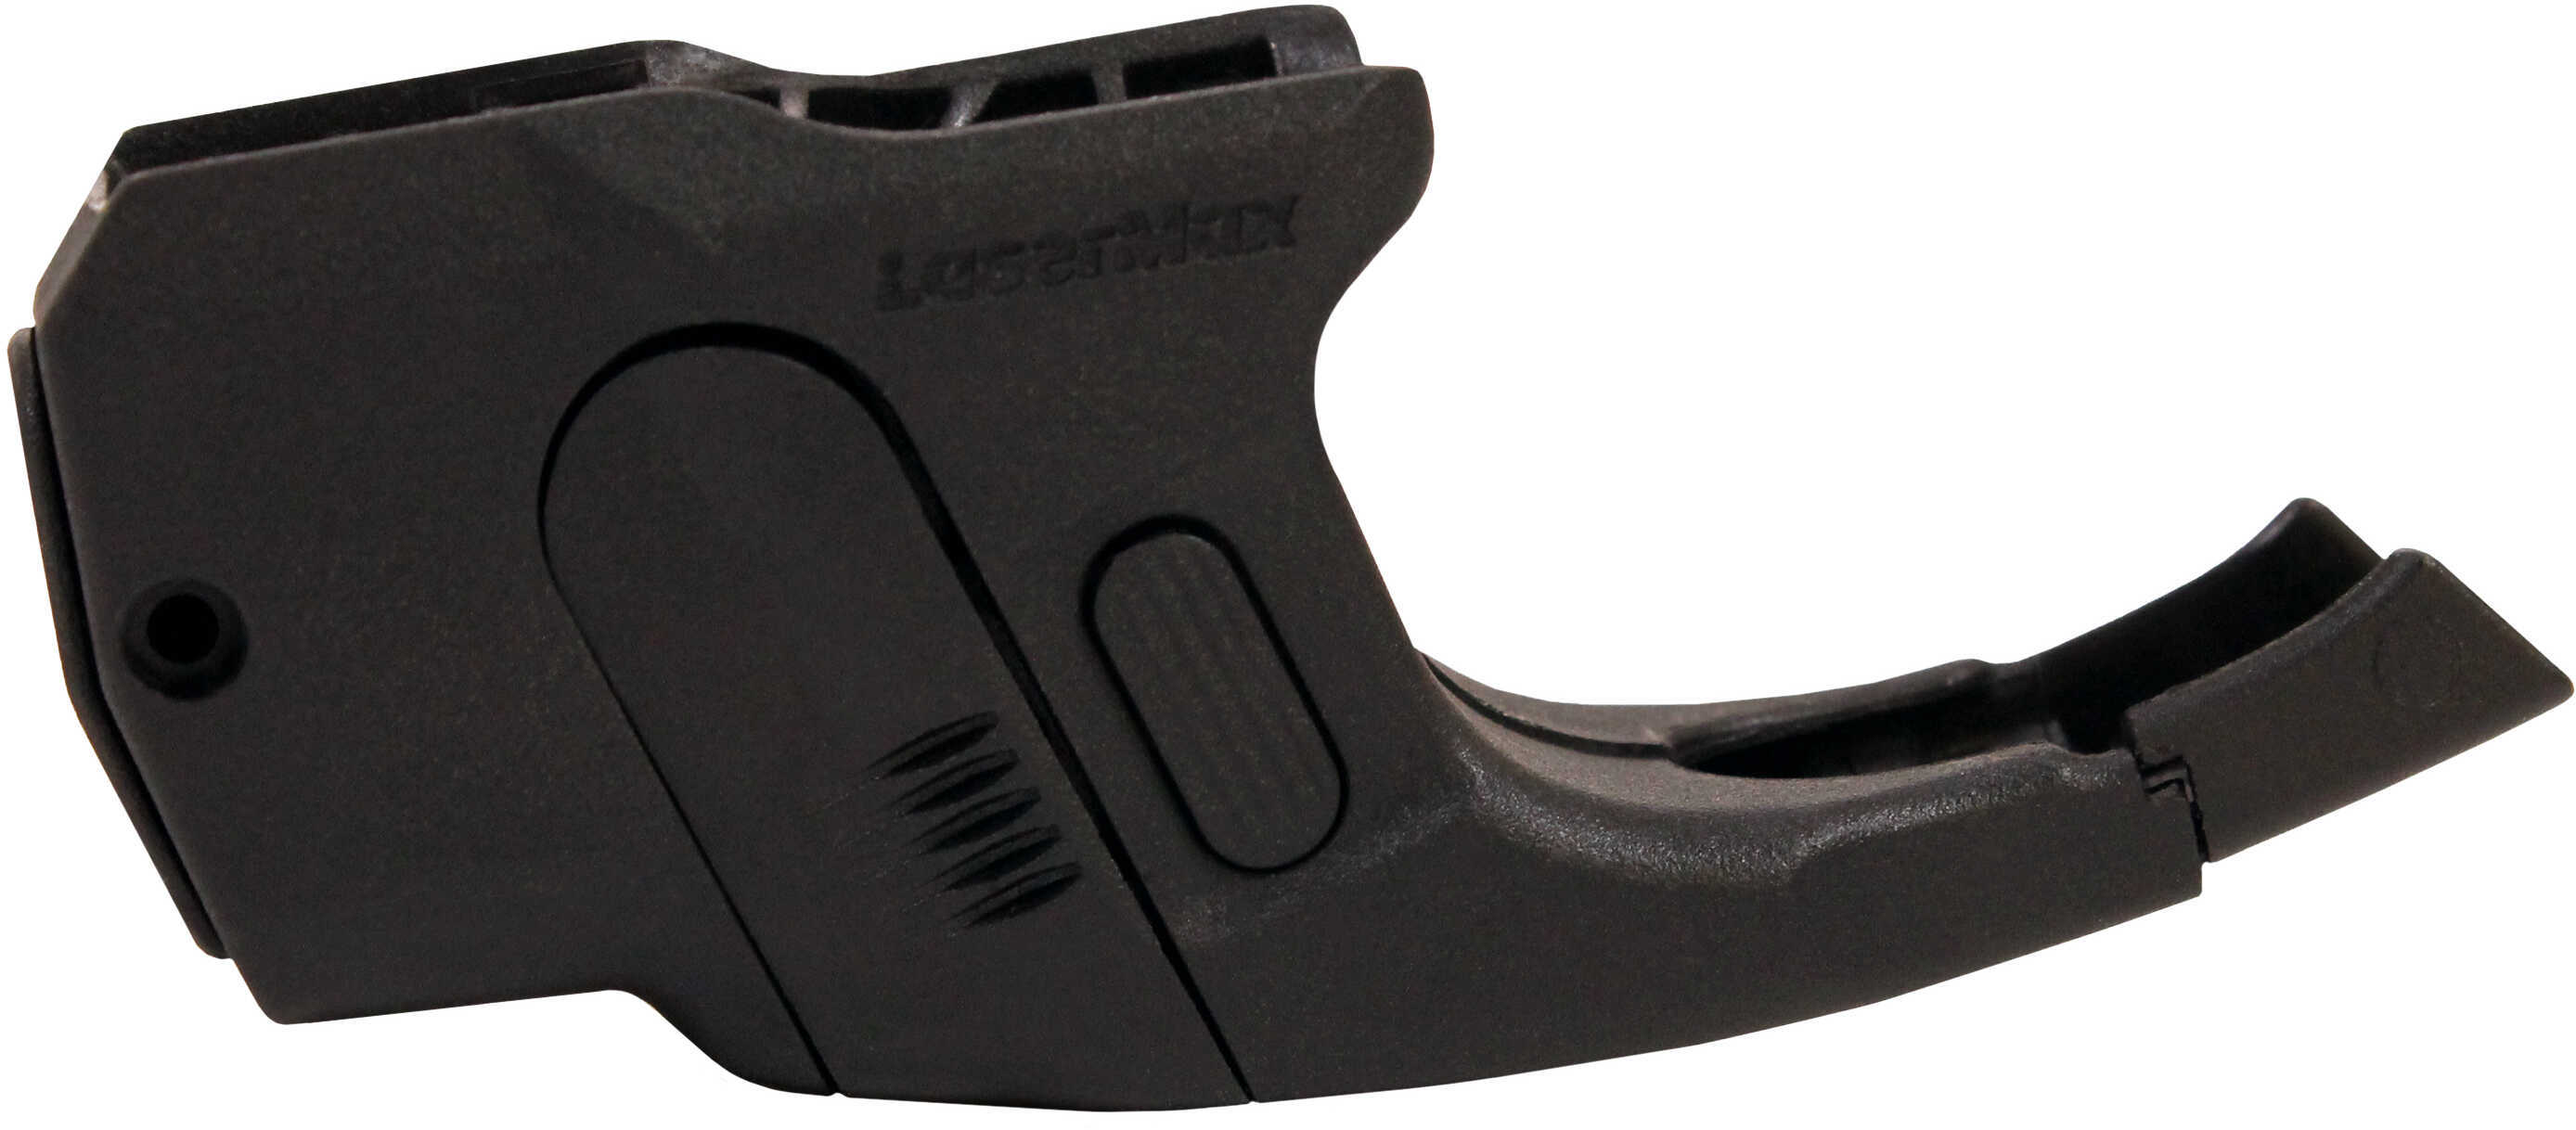 LaserMax CenterFire Laser/Light Combo With GripSense Technology For S&W Shield 9mm .40 Caliber Guard Mount Black Finish Red